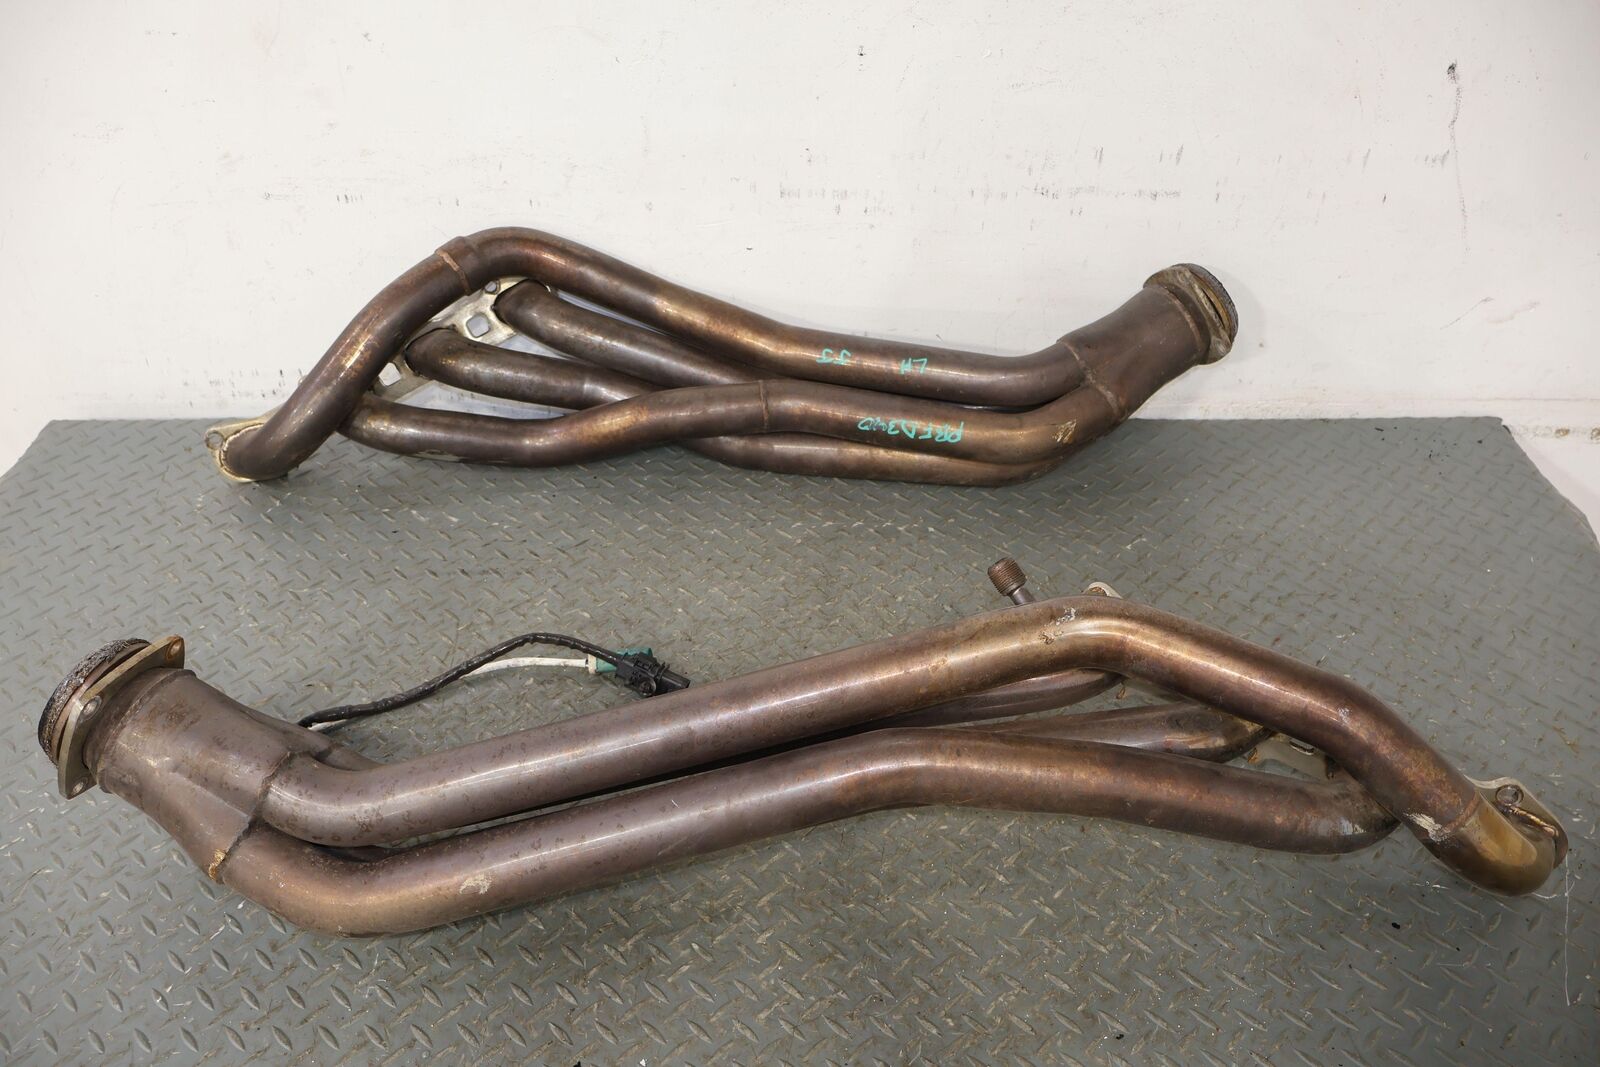 07-14 Ford Mustang GT500 5.4L Supercharged Pair LH&RH Long Tube Exhaust Headers